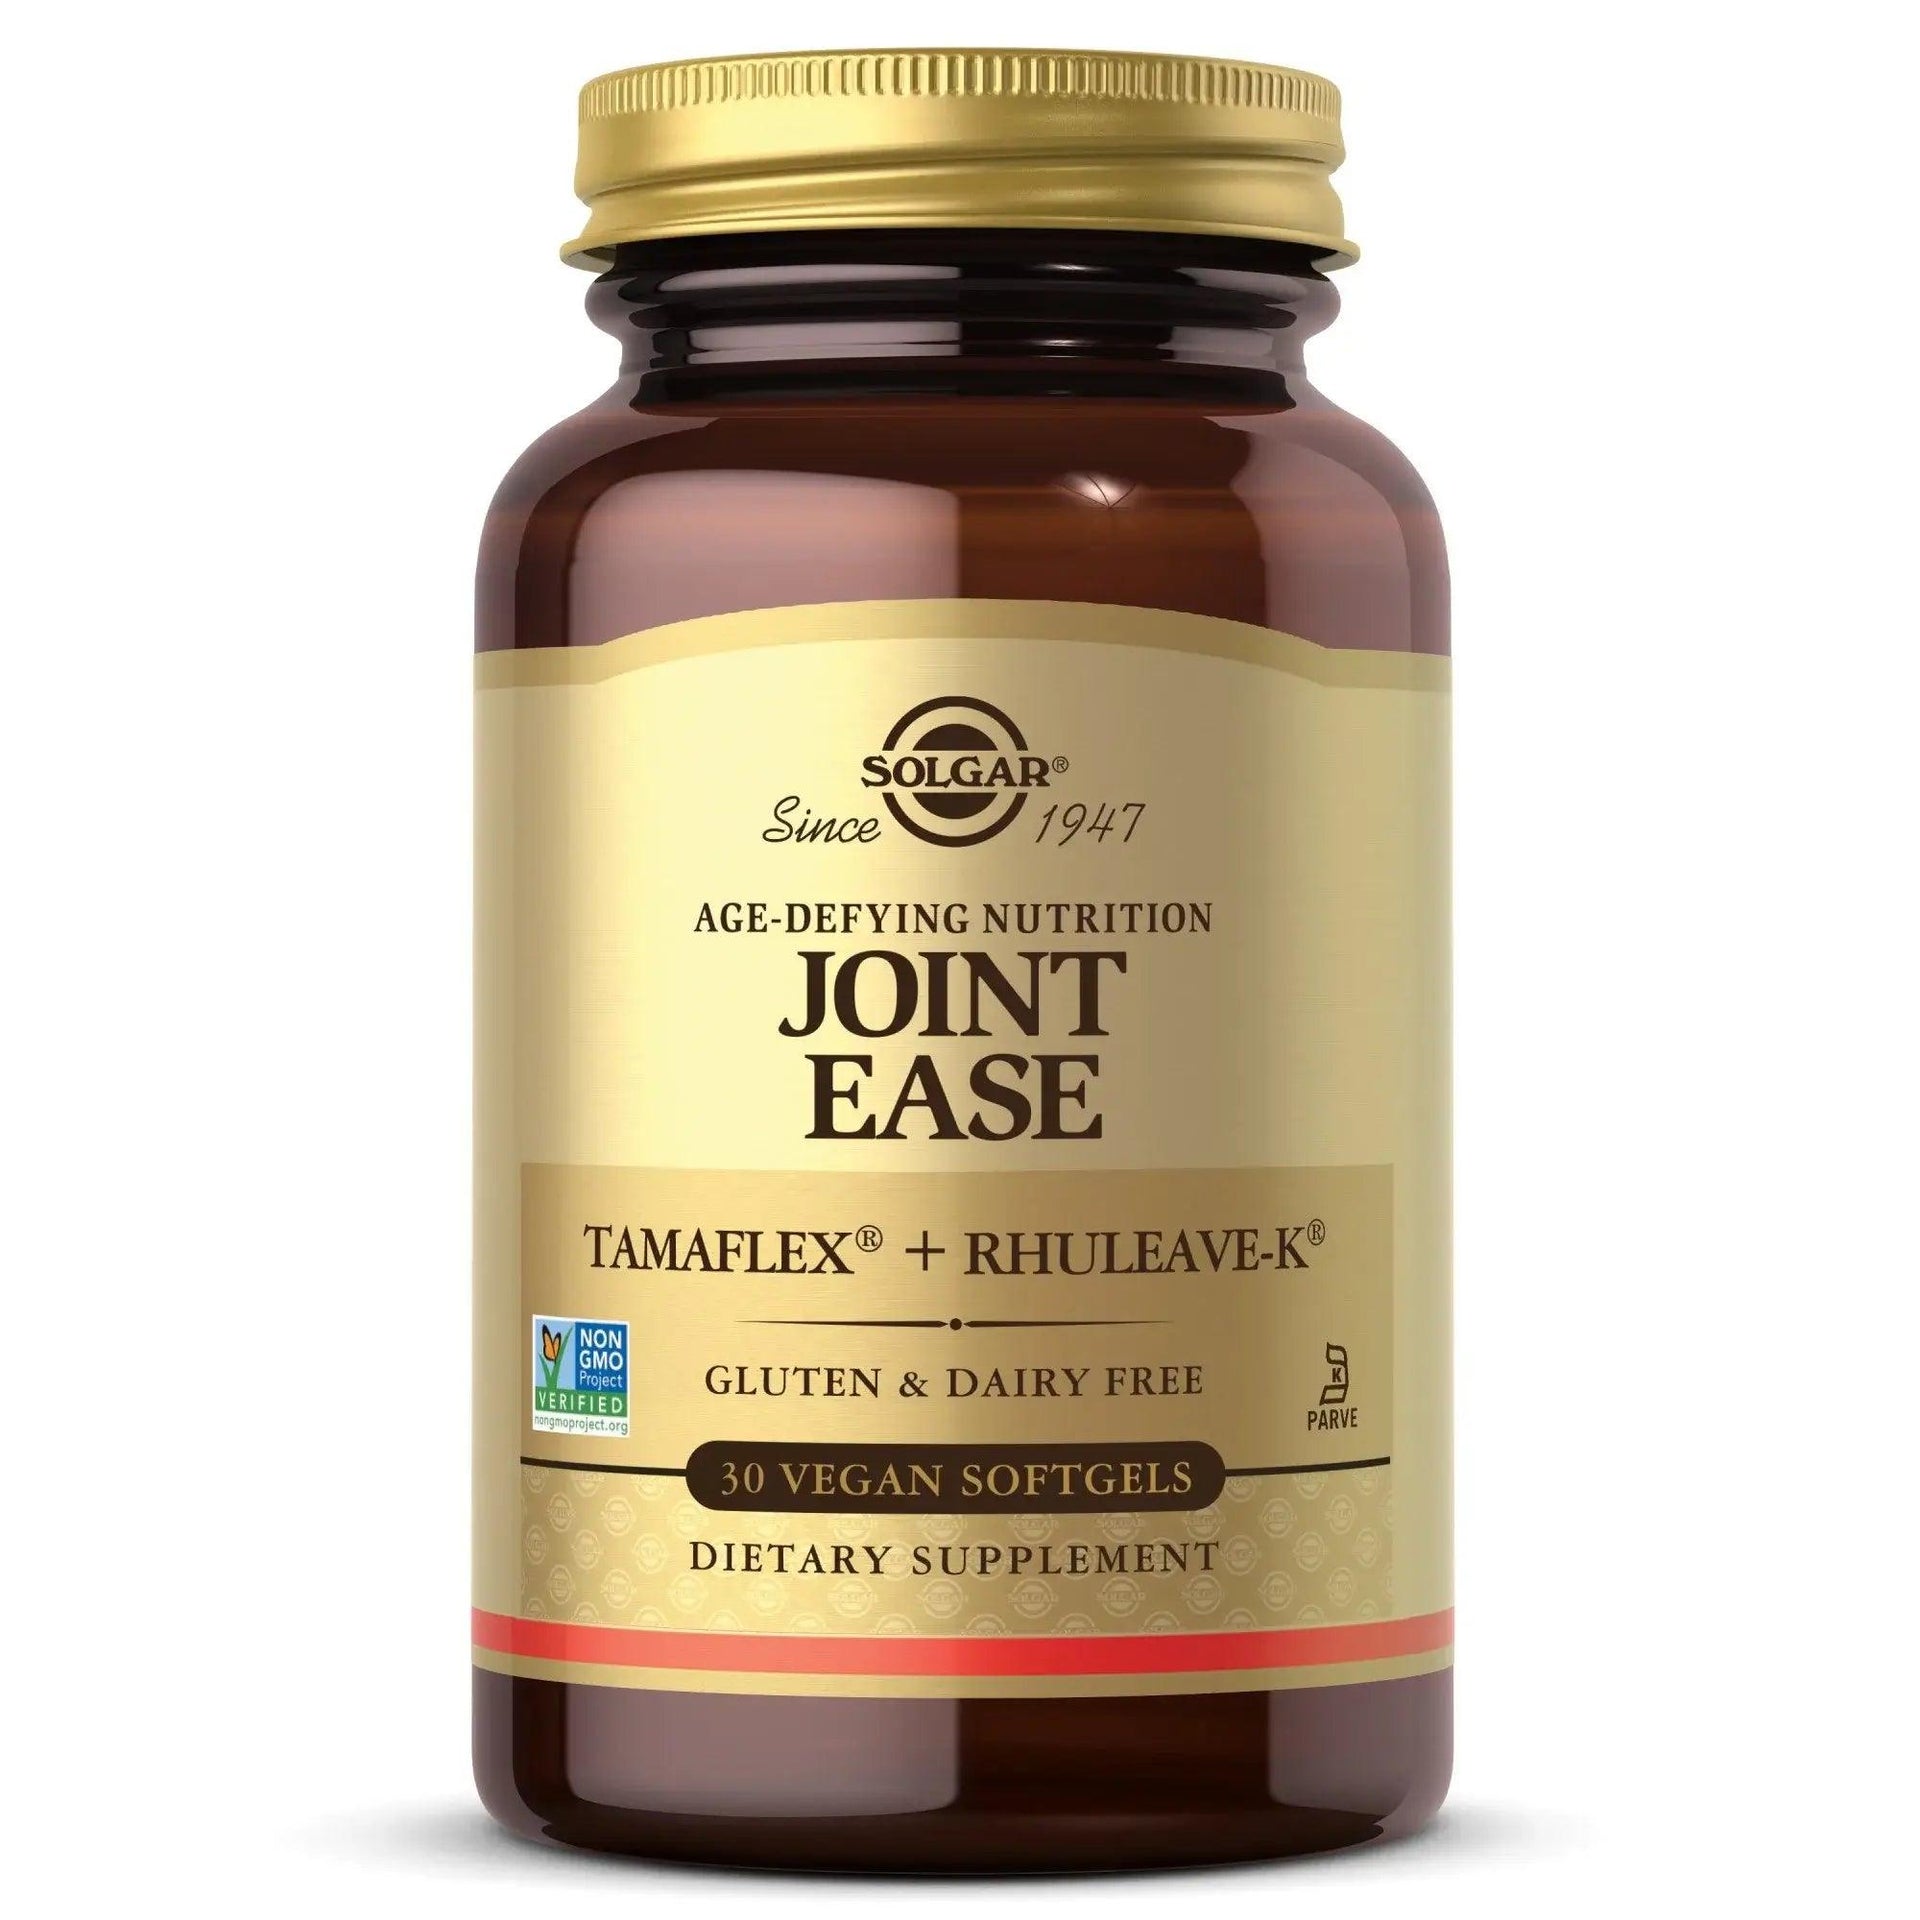 Solgar Joint Ease (30 Softgels) - Buy At New Green Nutrition